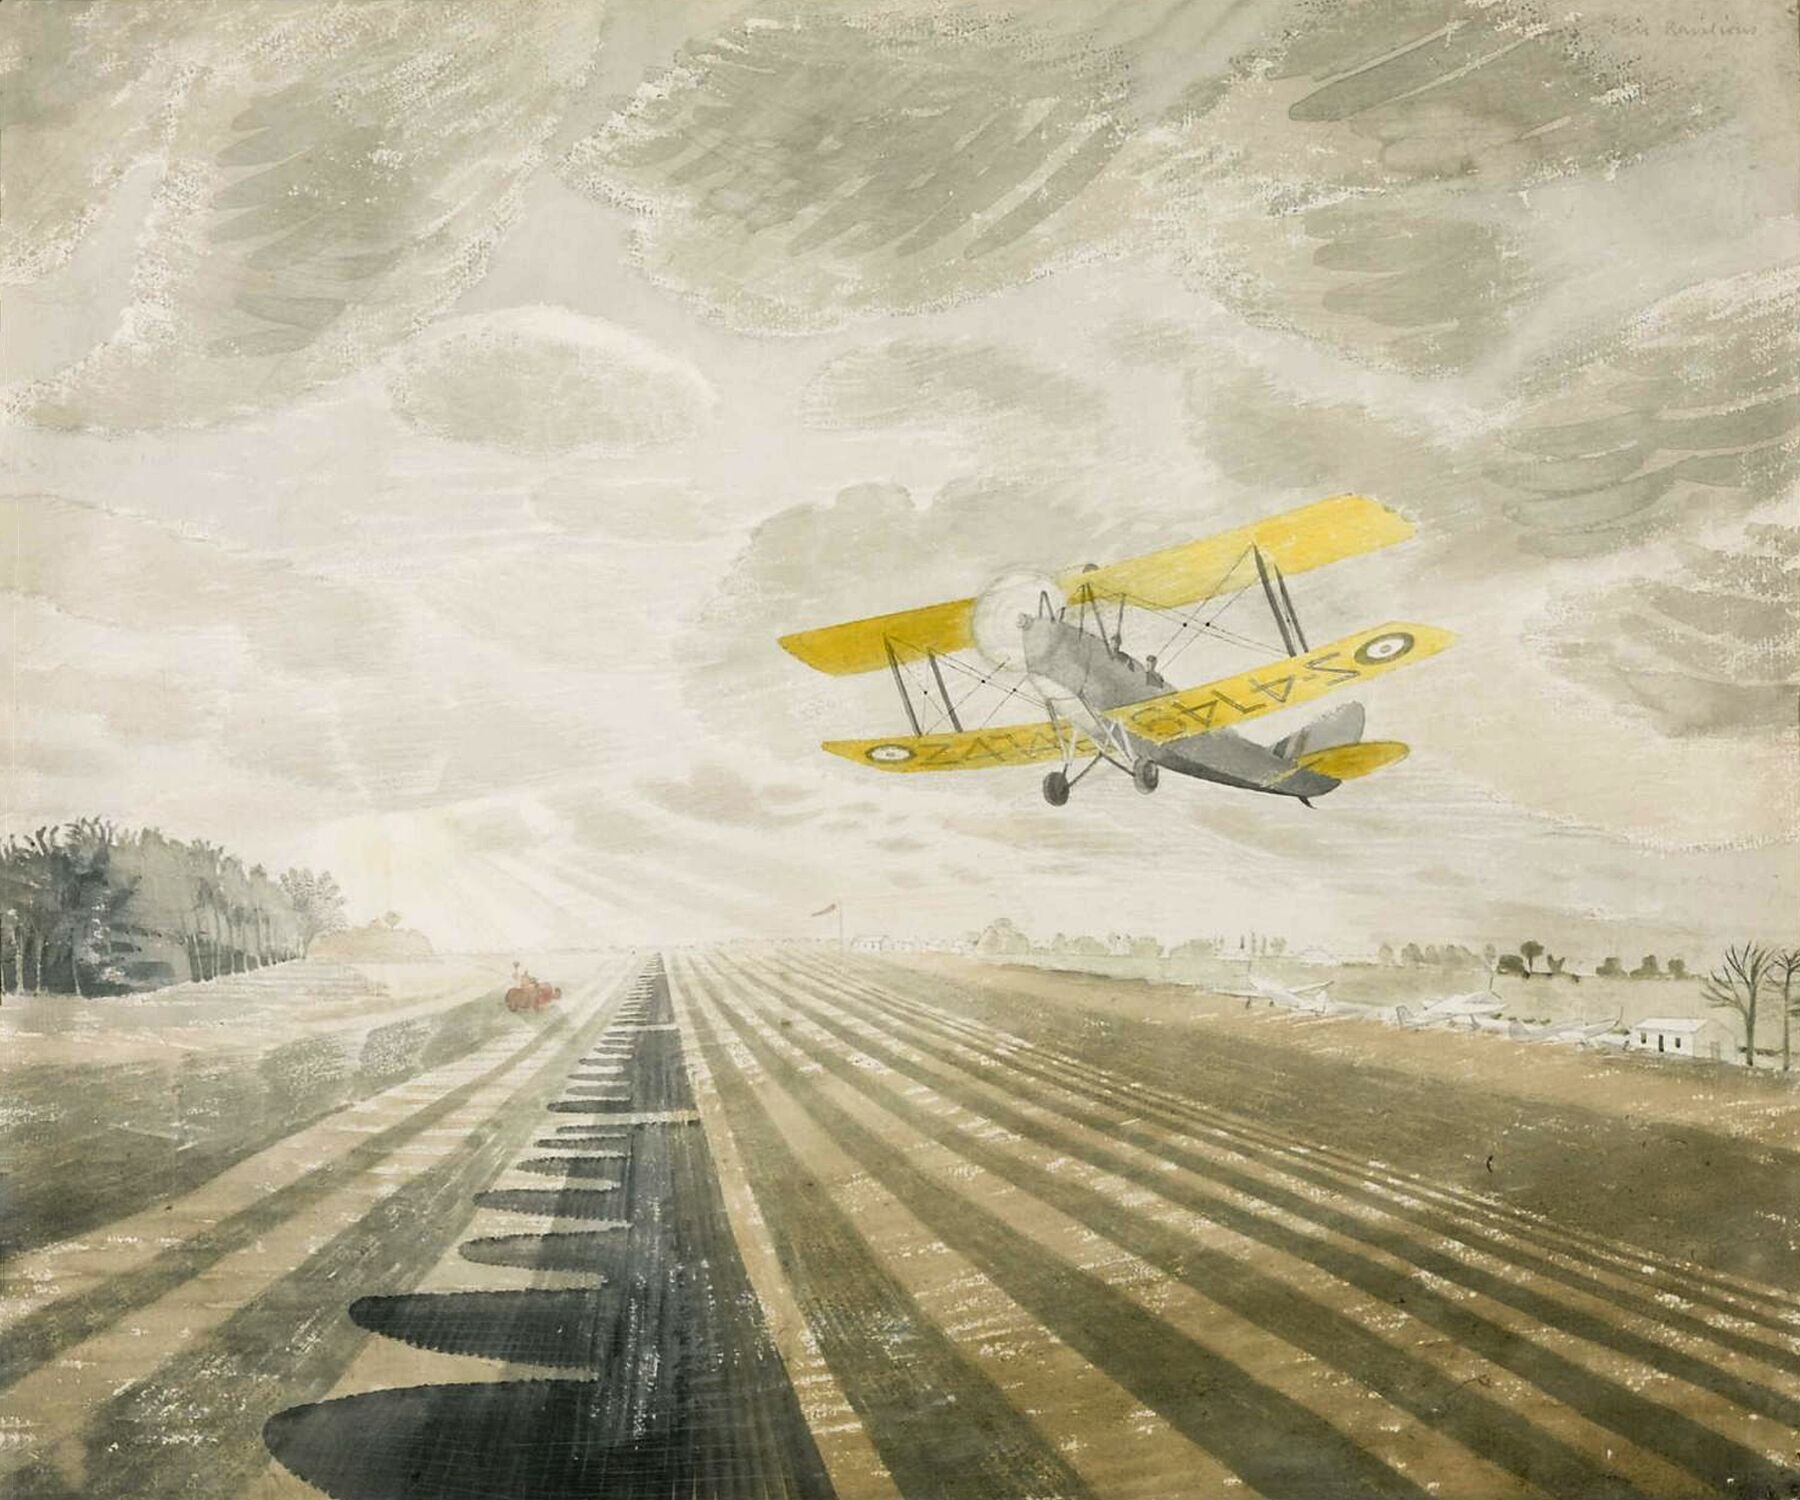 Tiger Moth by Eric Ravilious - 1942